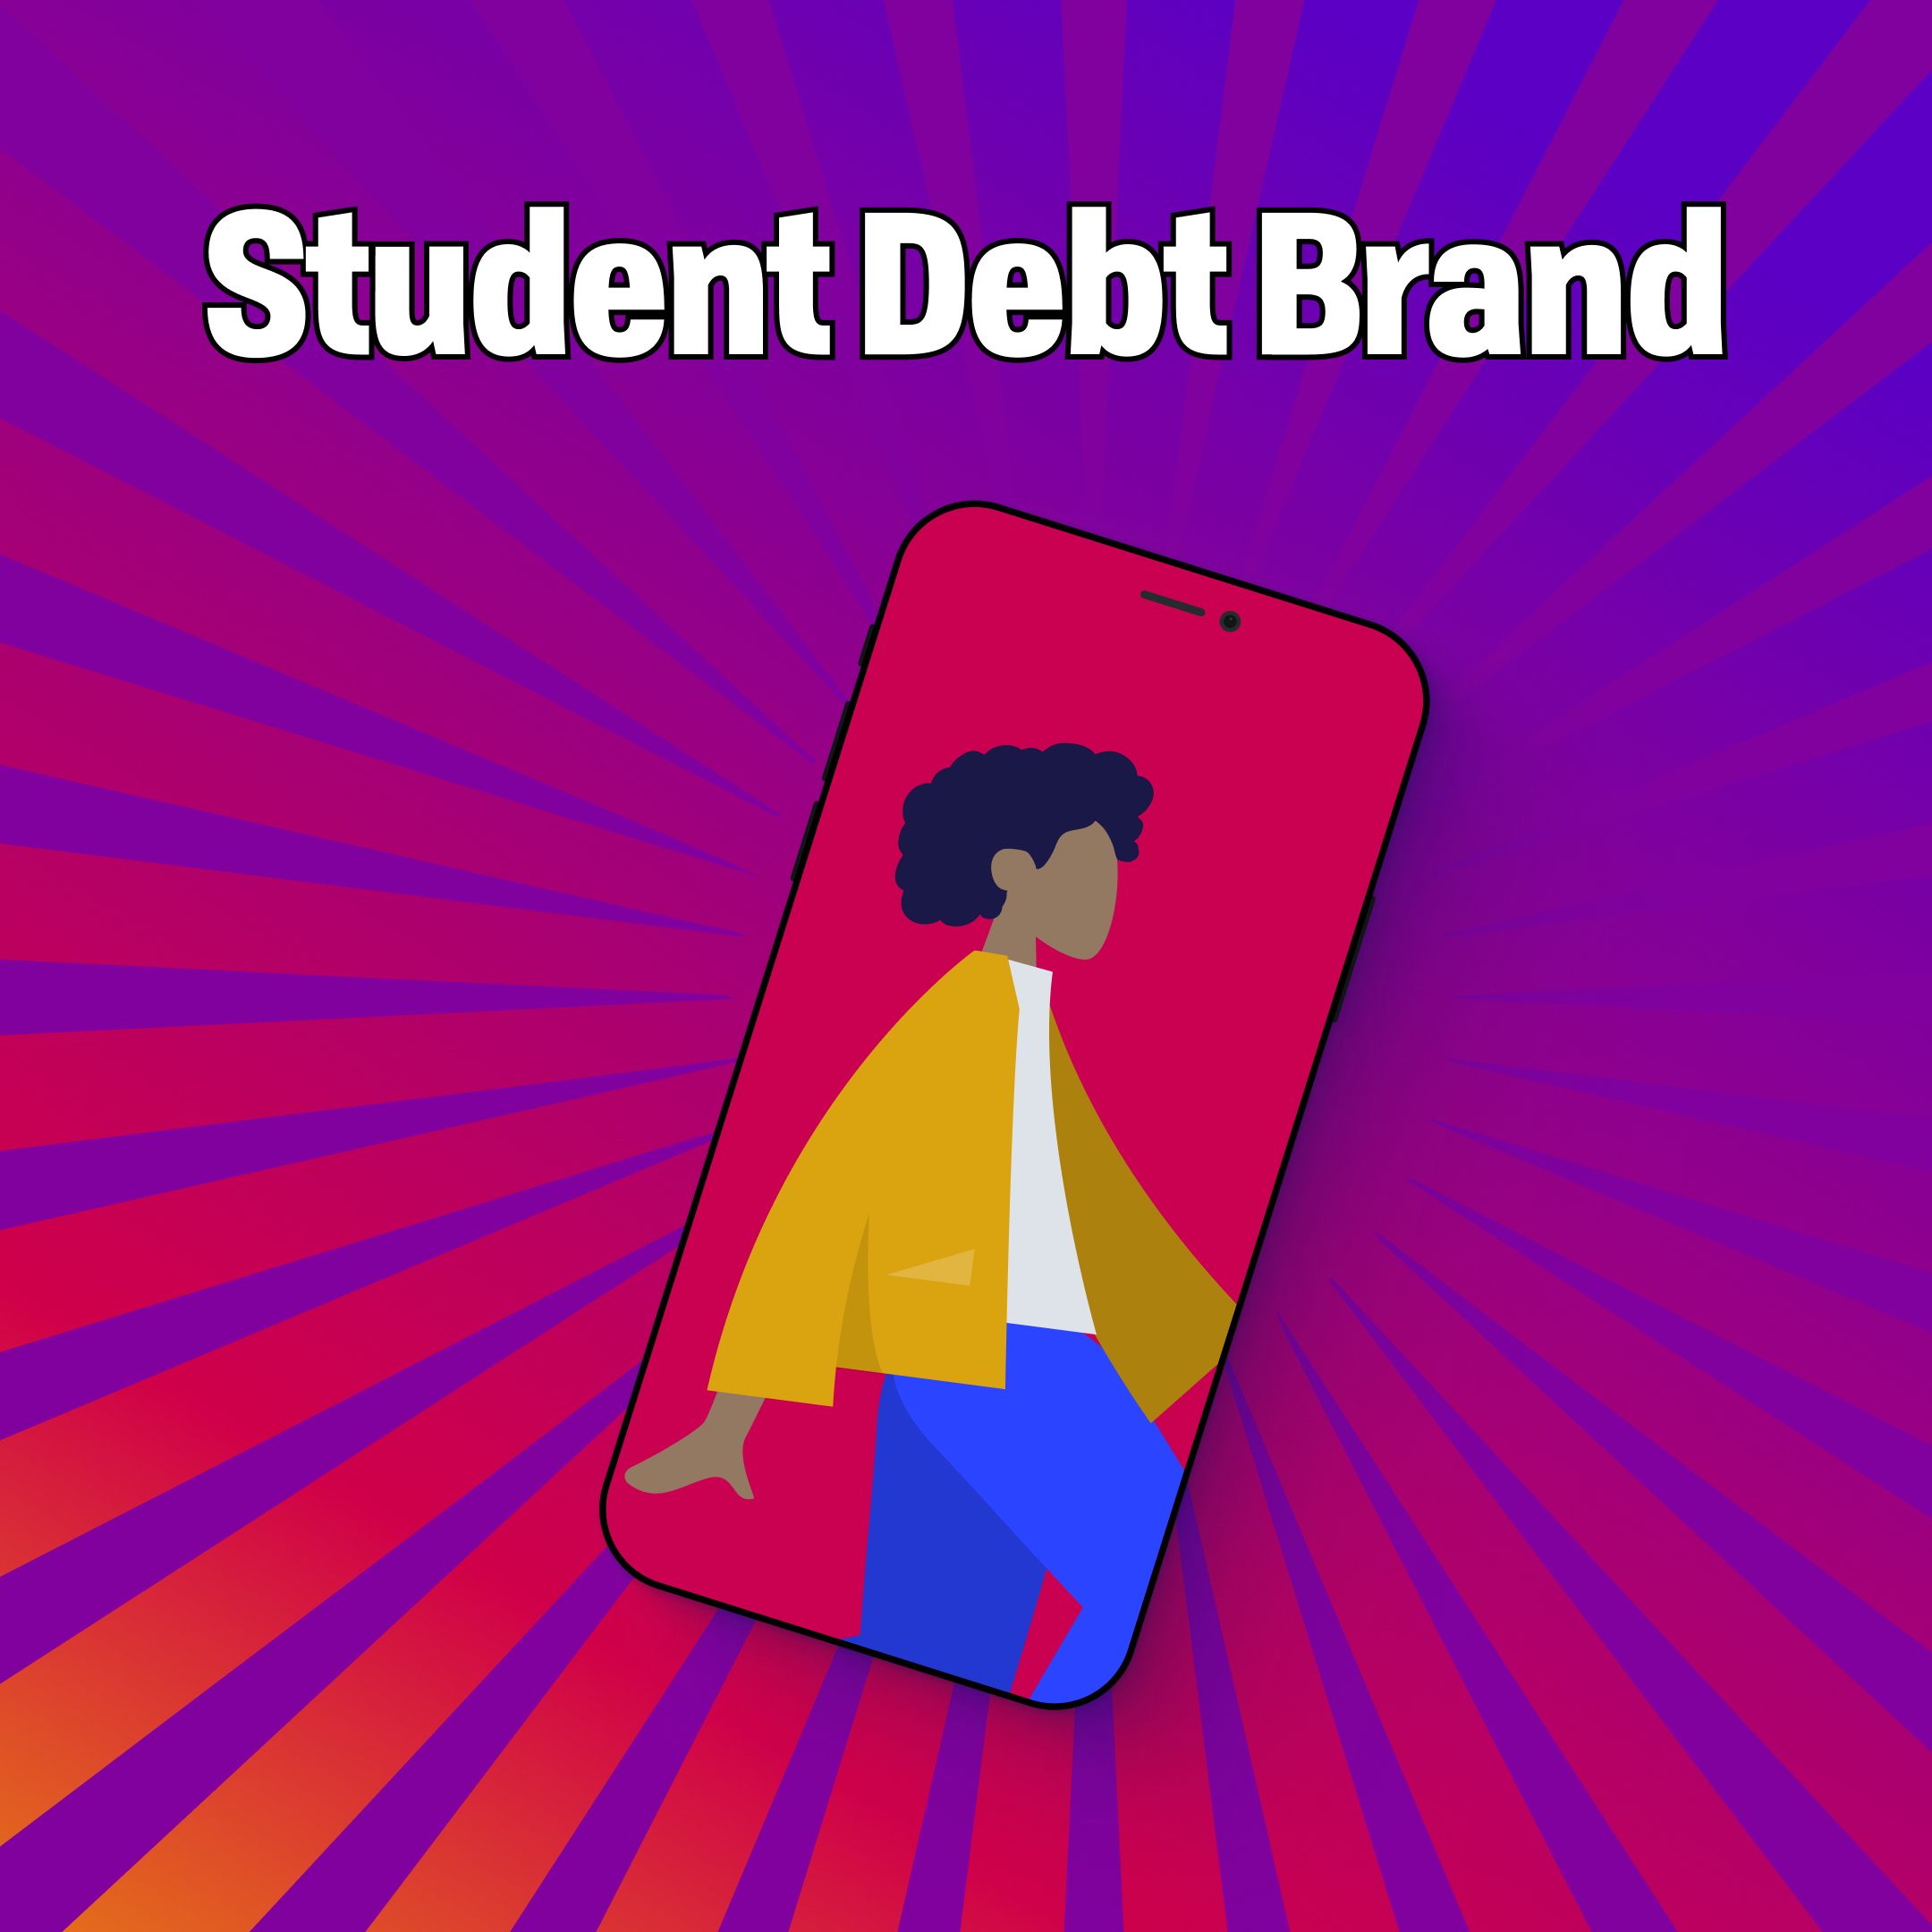 words Student Debt Brand below a woman in a cell phone is walking forward. The cell phone has a pink background and the woman has a yellow jacket with white shirt with blue pants. Behind the phone the background is a gradient colors looking like instagram top right is purple moving to the bottom left is pink and light oranges. There are purple rays starting in the center and getting bigger to the edges.